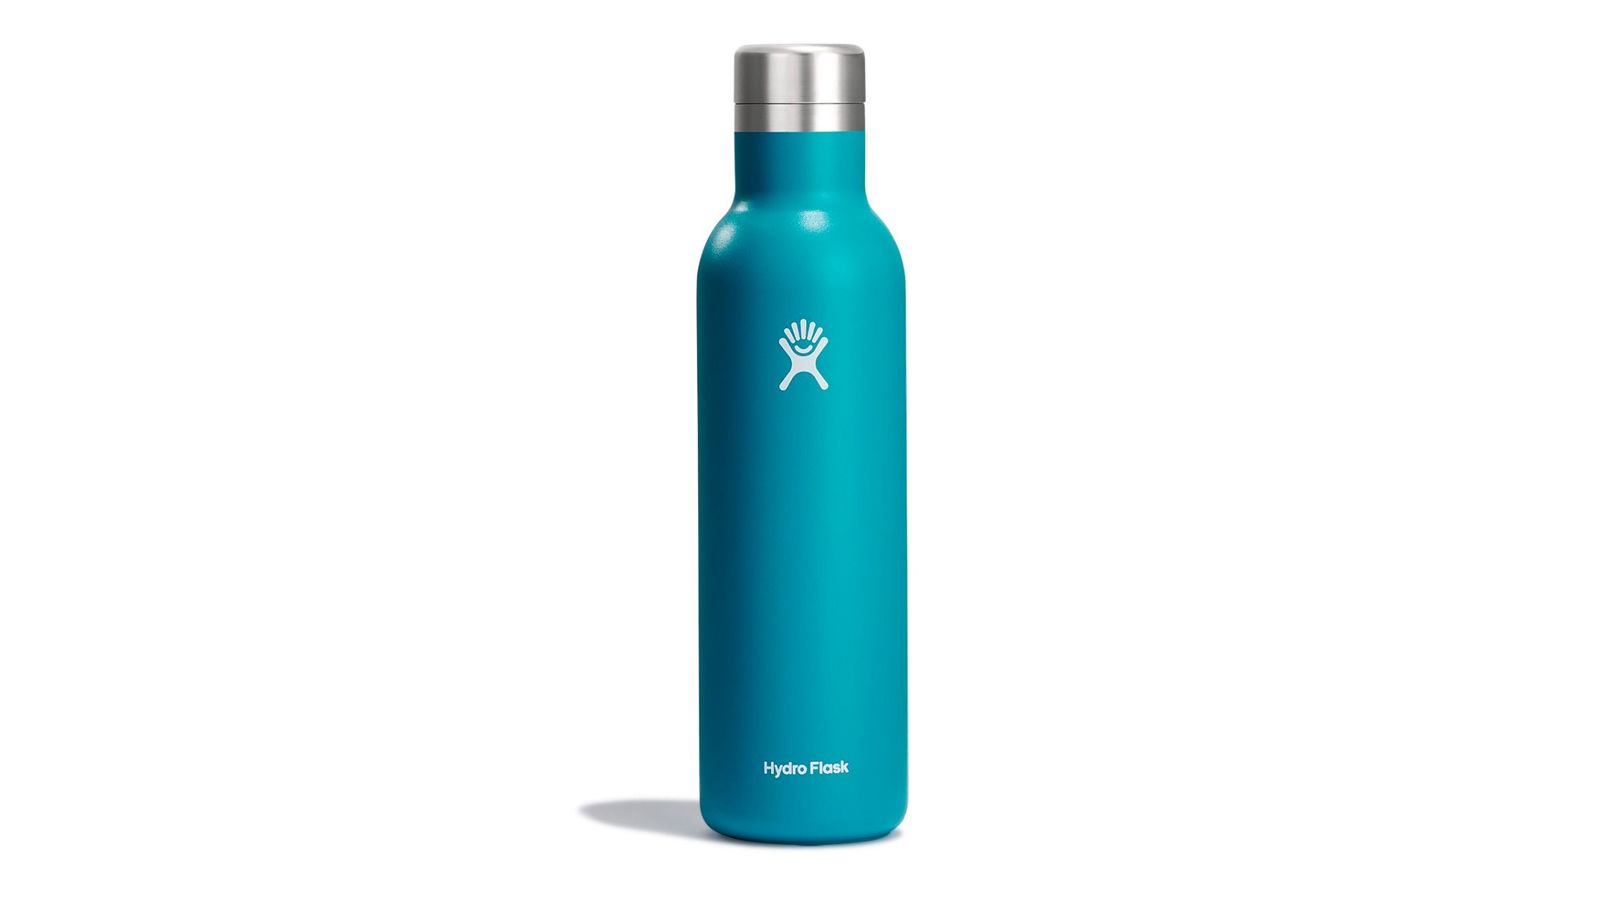 Hydro Flask Black Friday Deals 2021: Early Deals and What to Expect